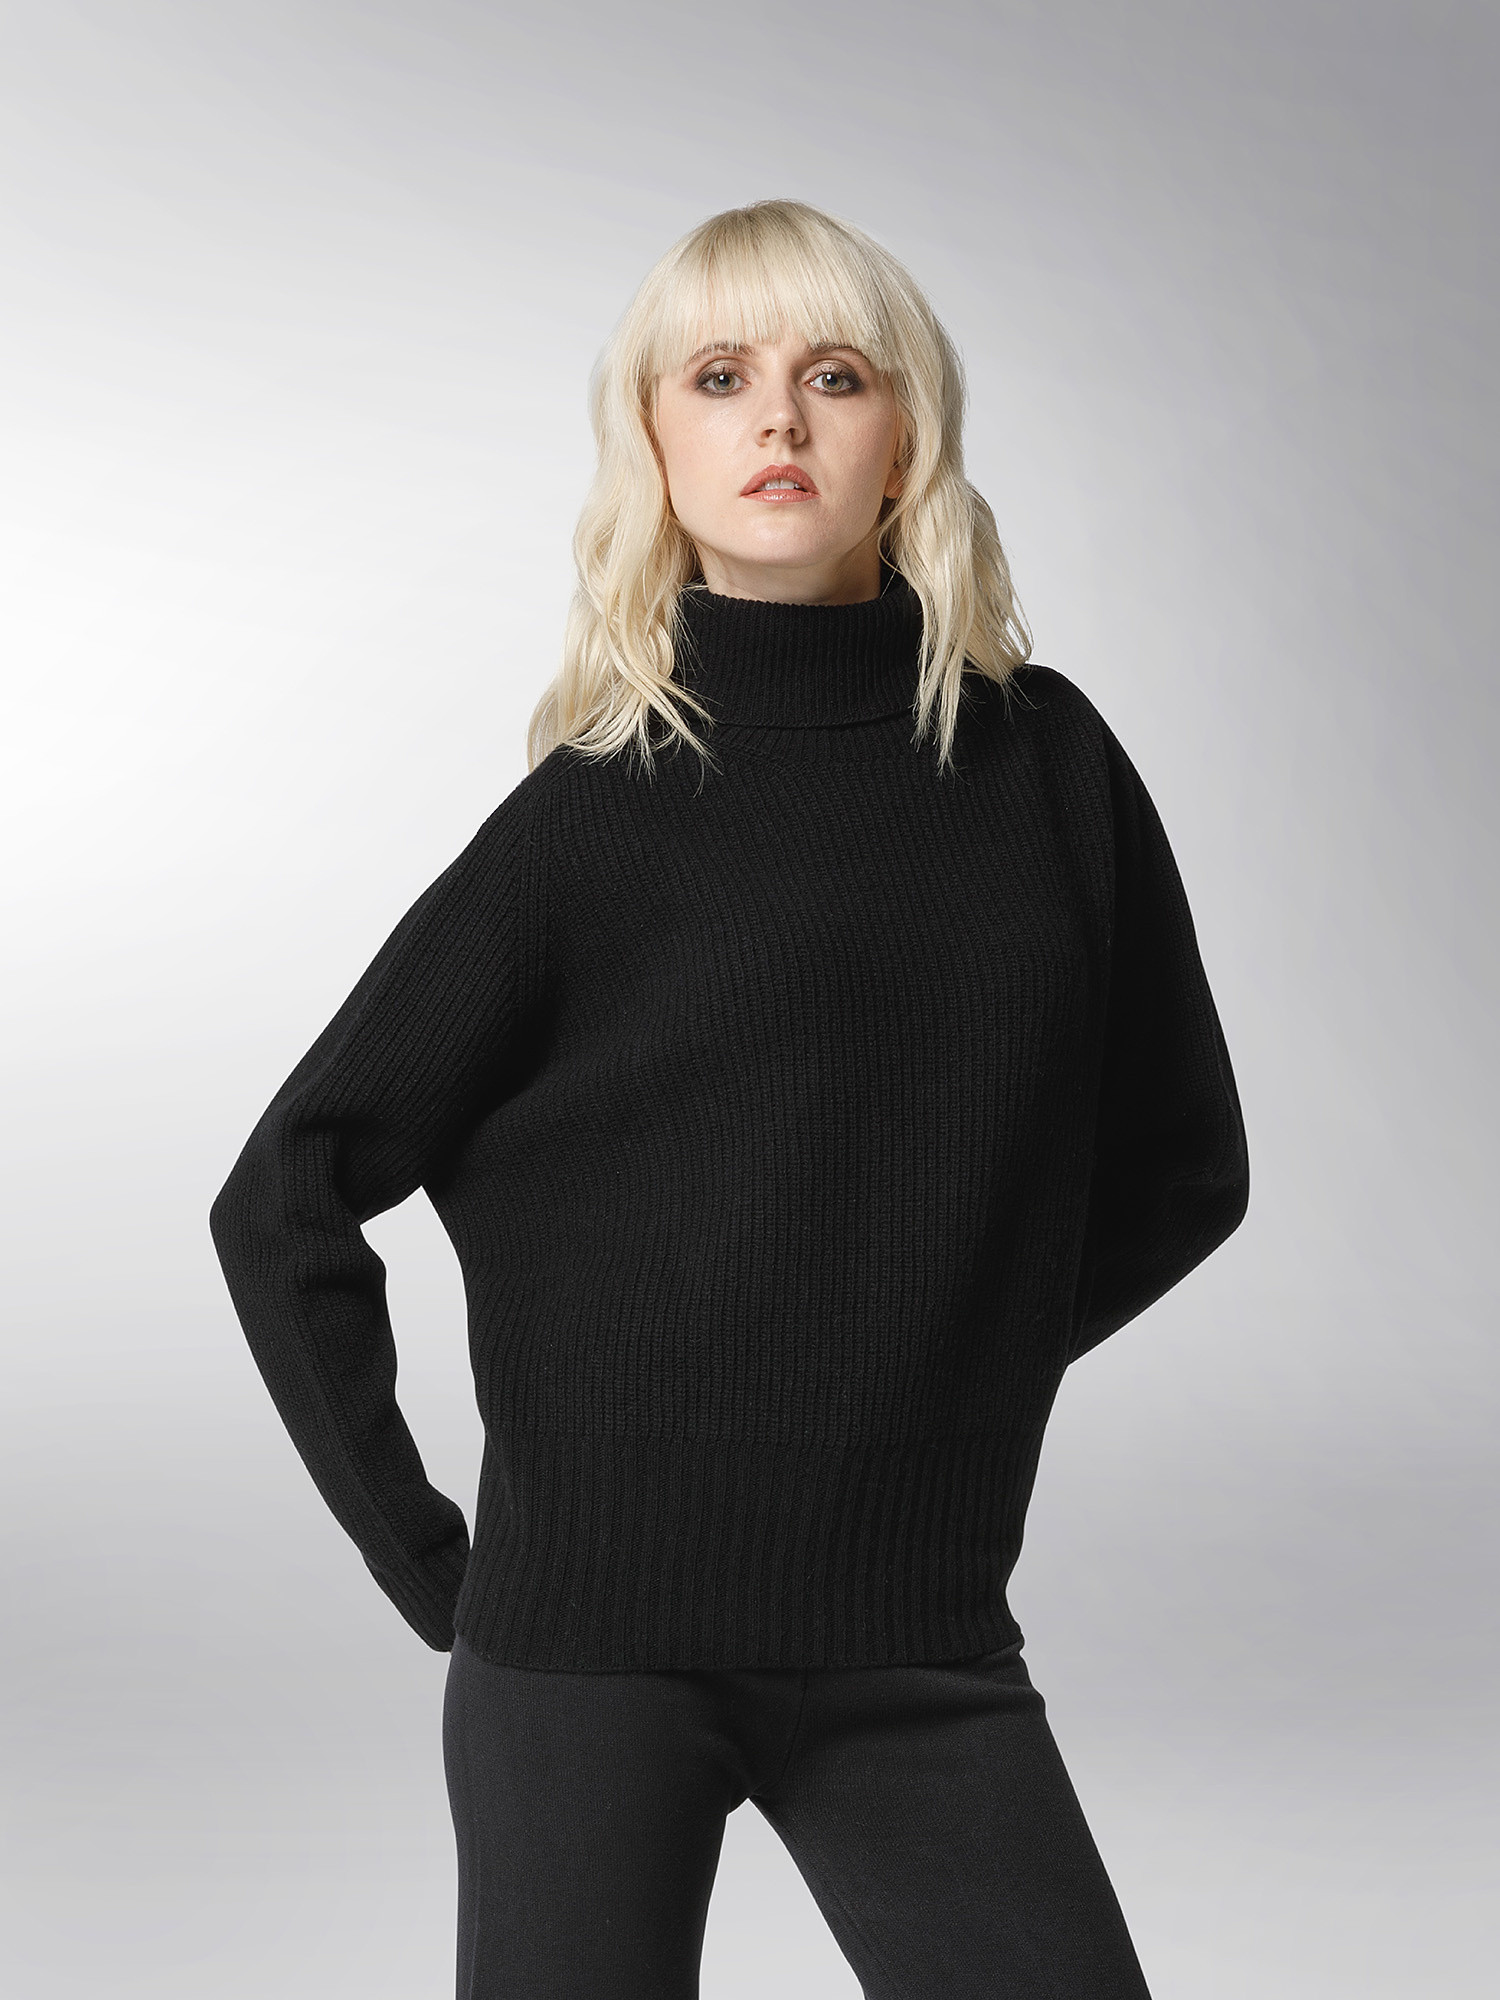 K Collection - Pullover dolcevita in lana cardata, Nero, large image number 3